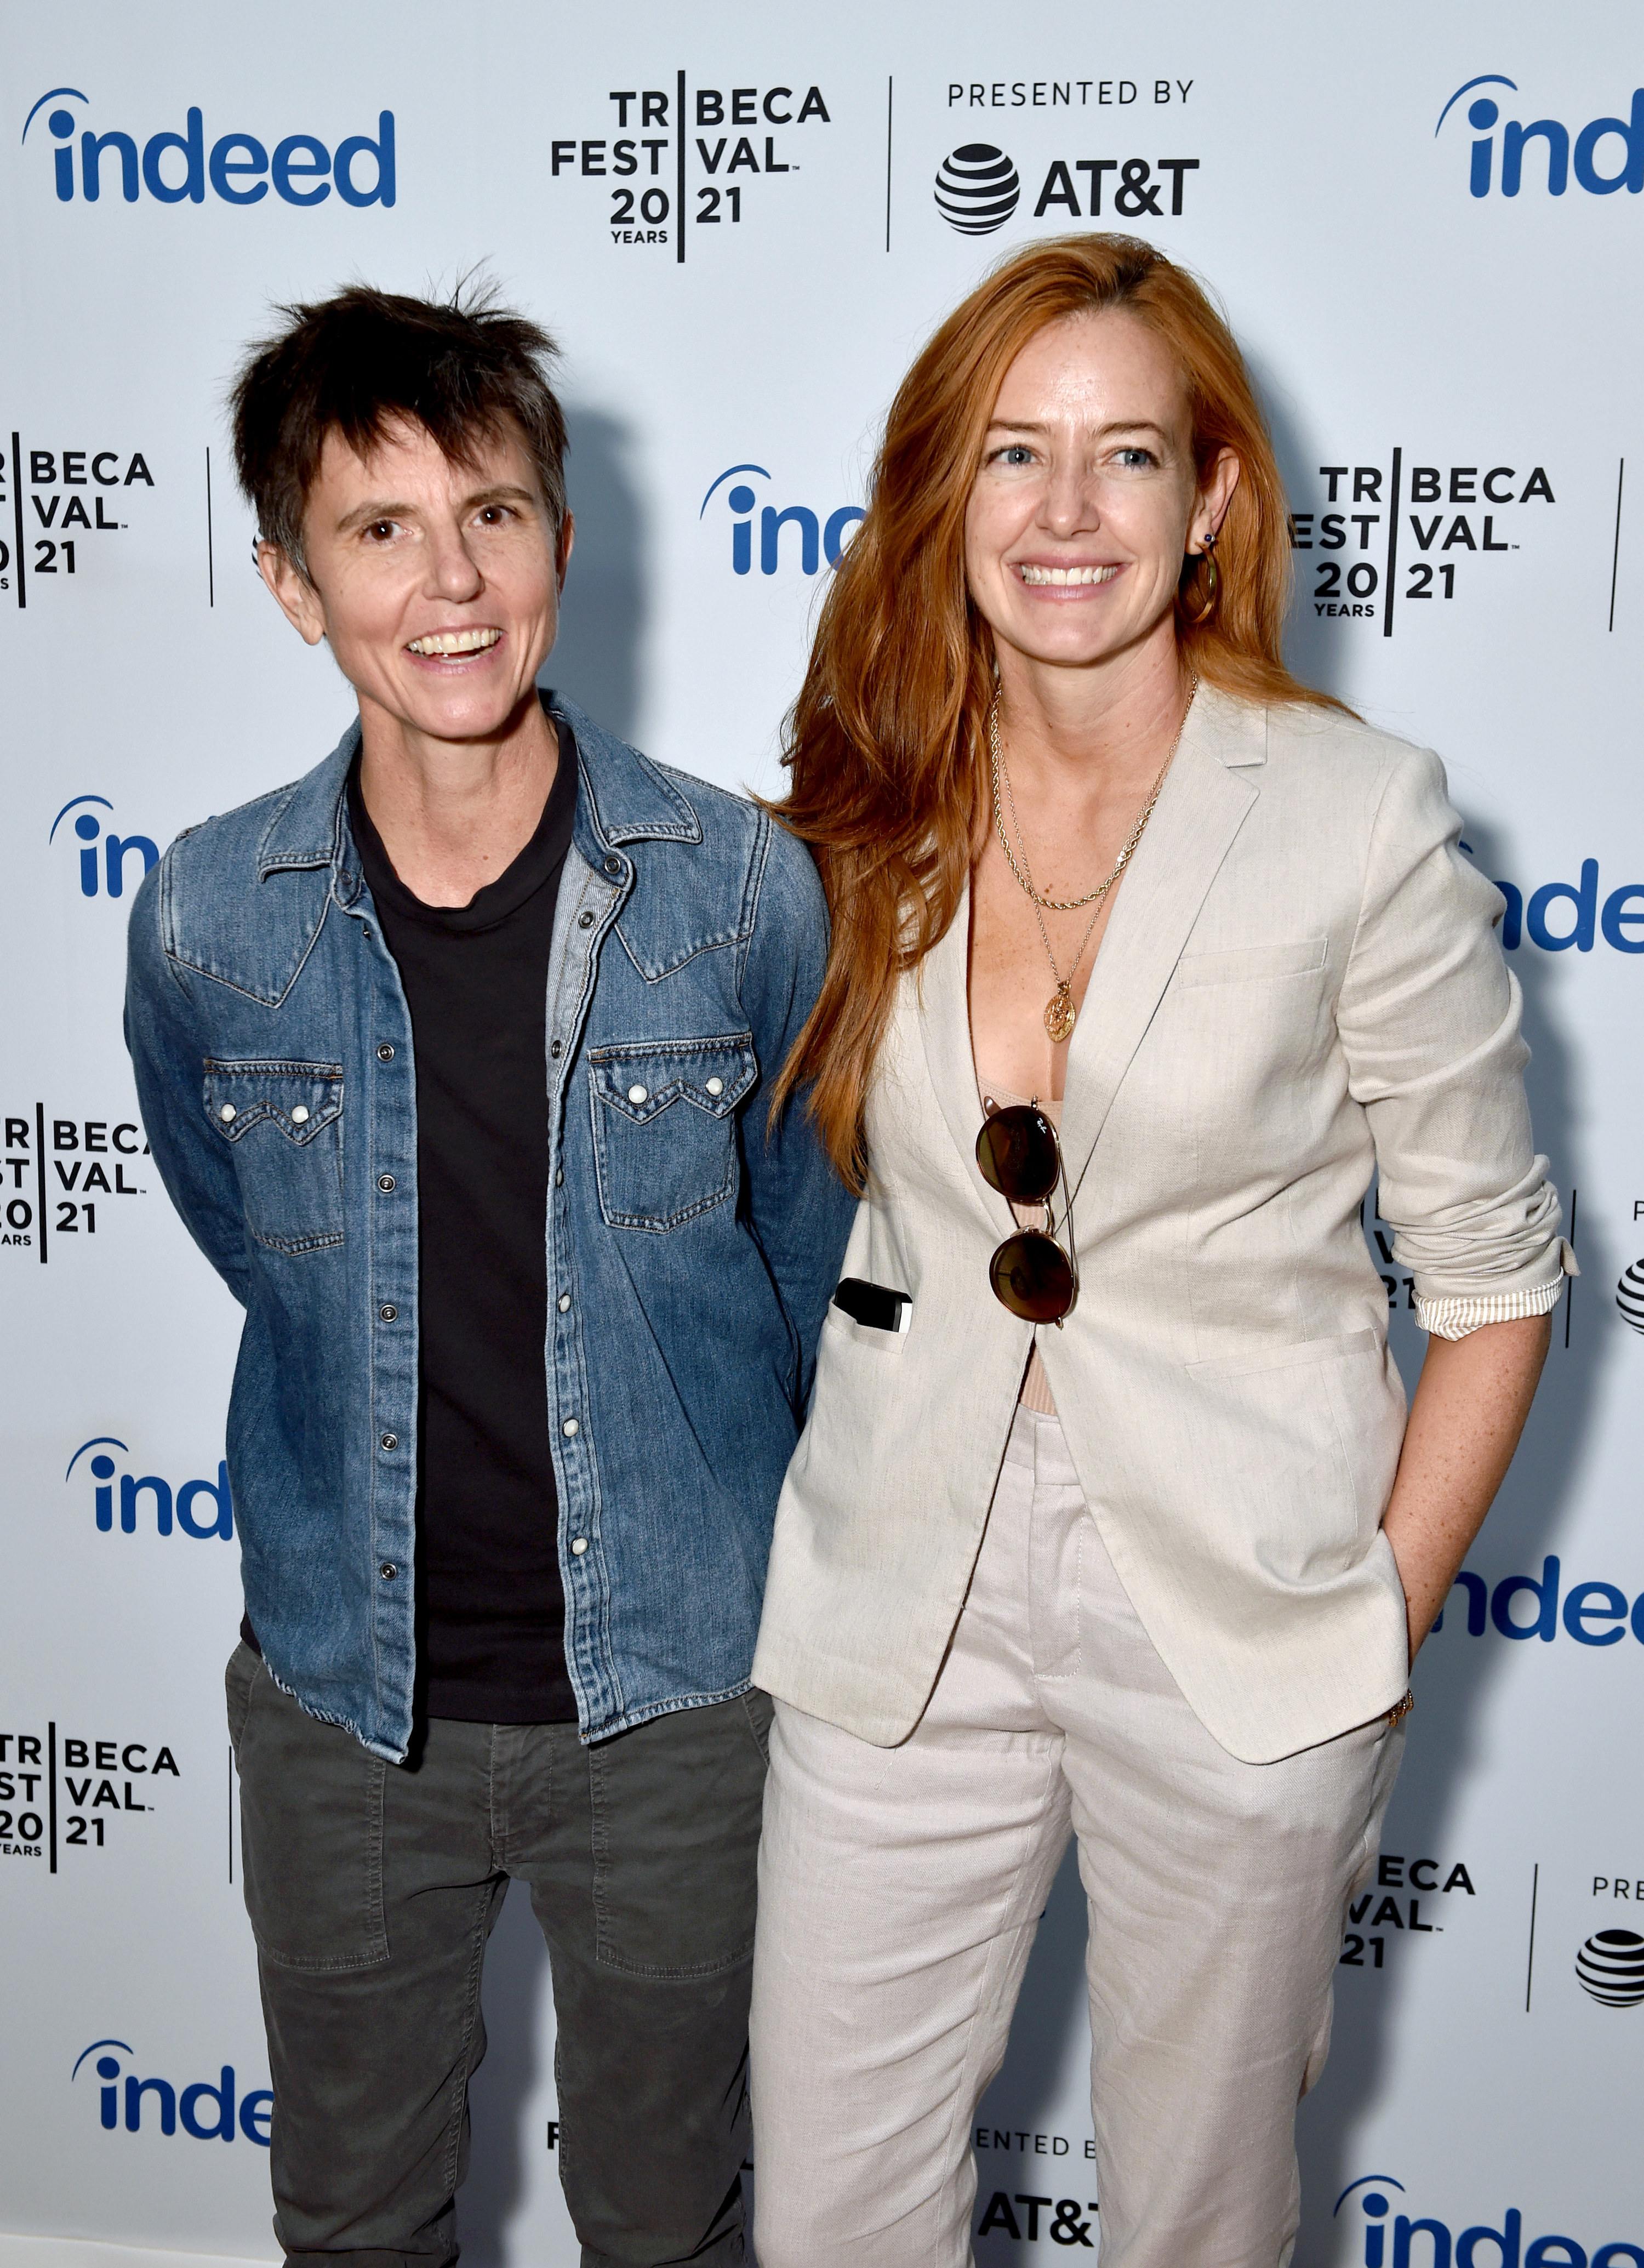 Tig Notaro and Stephanie Allynne at an event